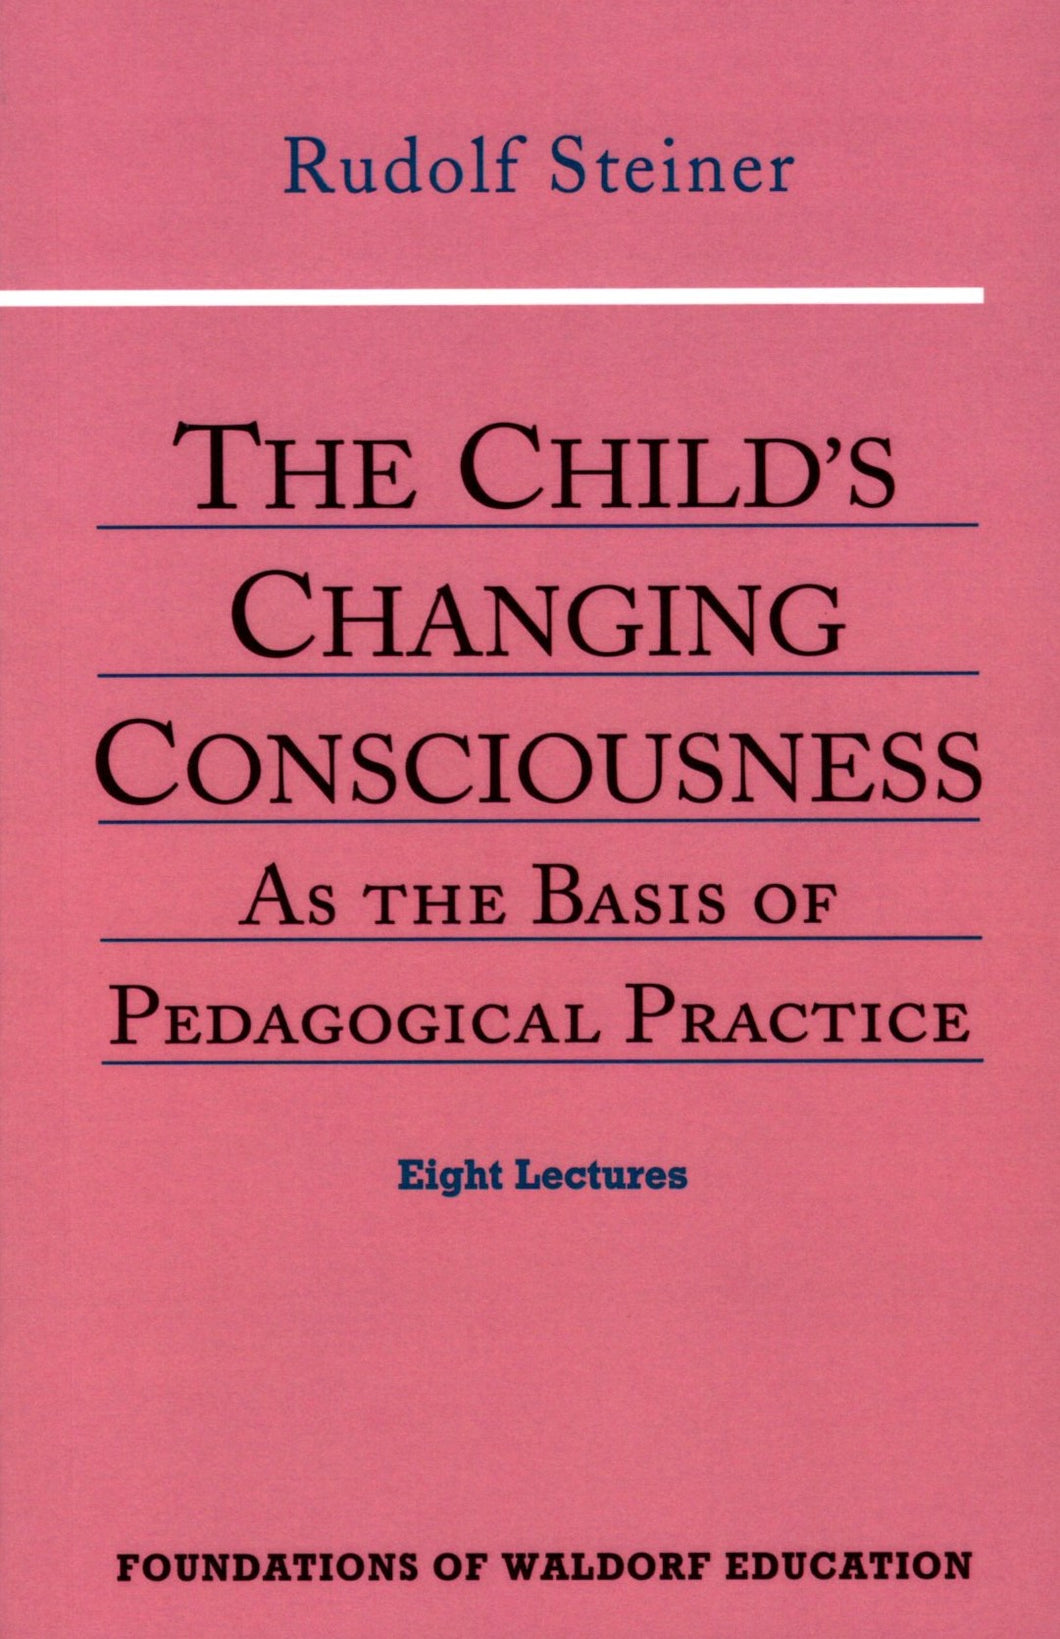 The Child’s Changing Consciousness